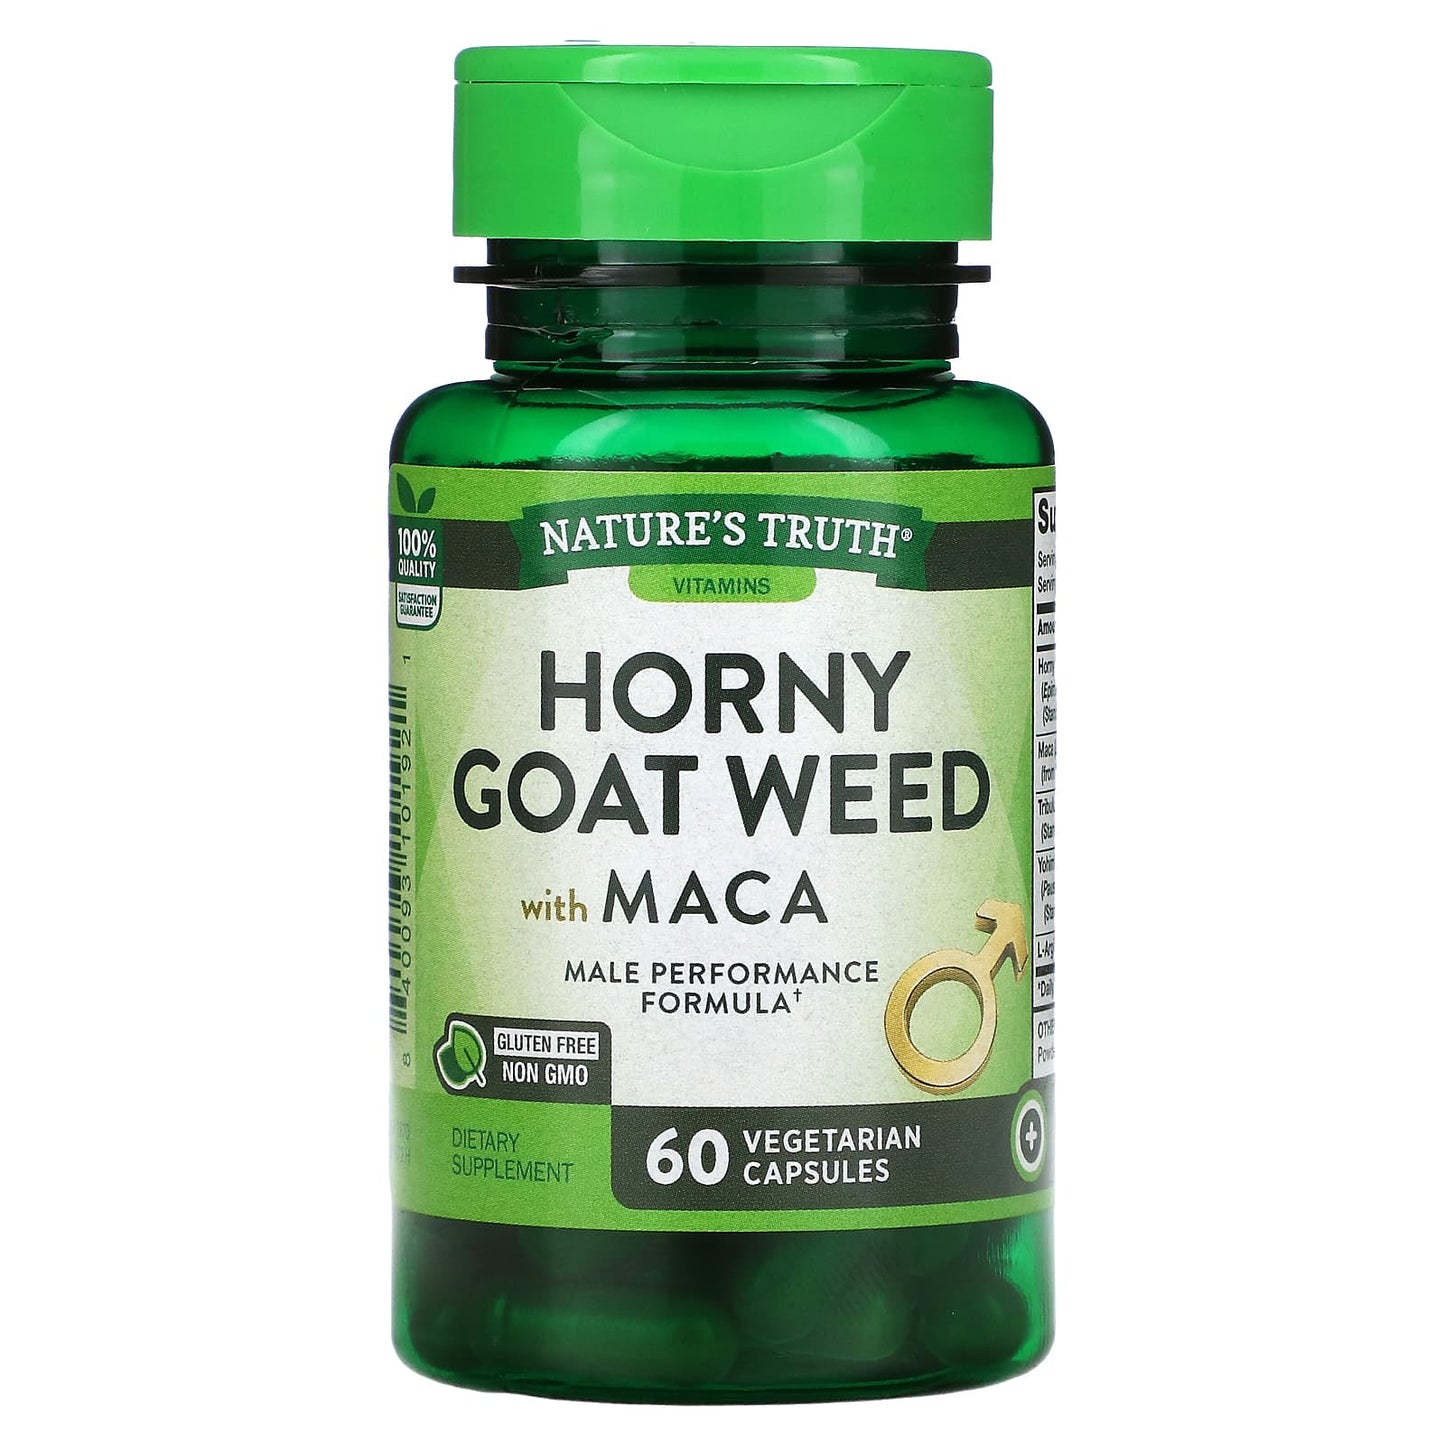 NATURE’S TRUTH HORNY GOAT WEED WITH MACA, 60 CAPSULES